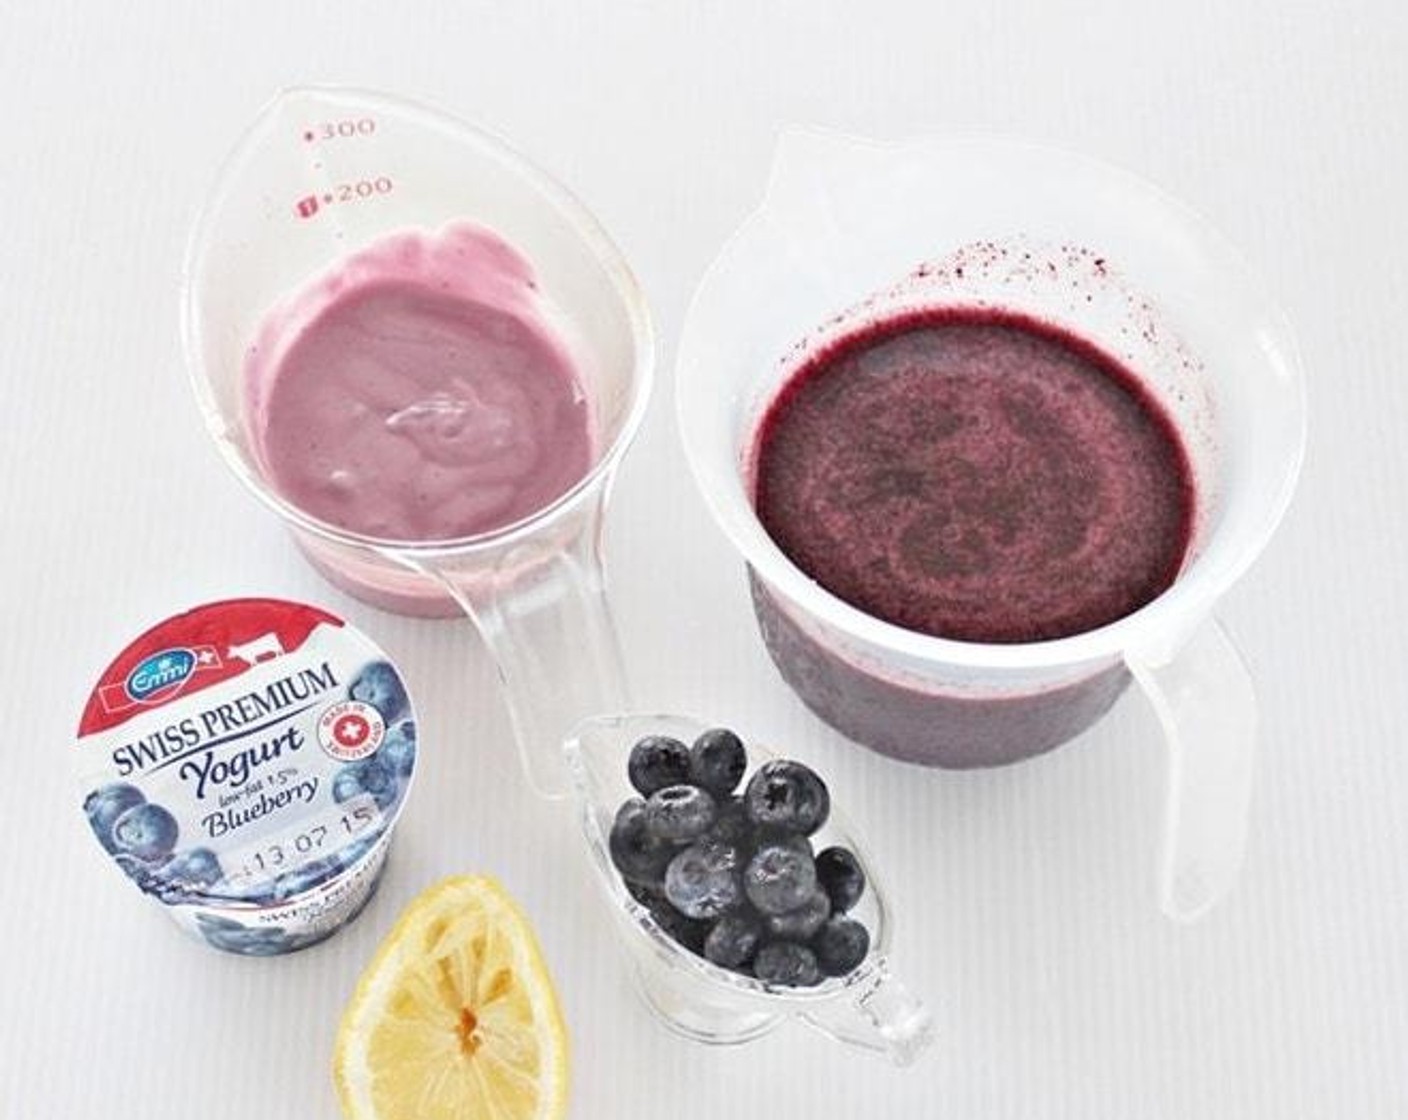 step 1 Place Fresh Blueberries (1 1/2 cups), 1/2 Tbsp juice from Lemon (1), Water (2/3 cup) and Caster Sugar (3 Tbsp) in a blender and blend until smooth.